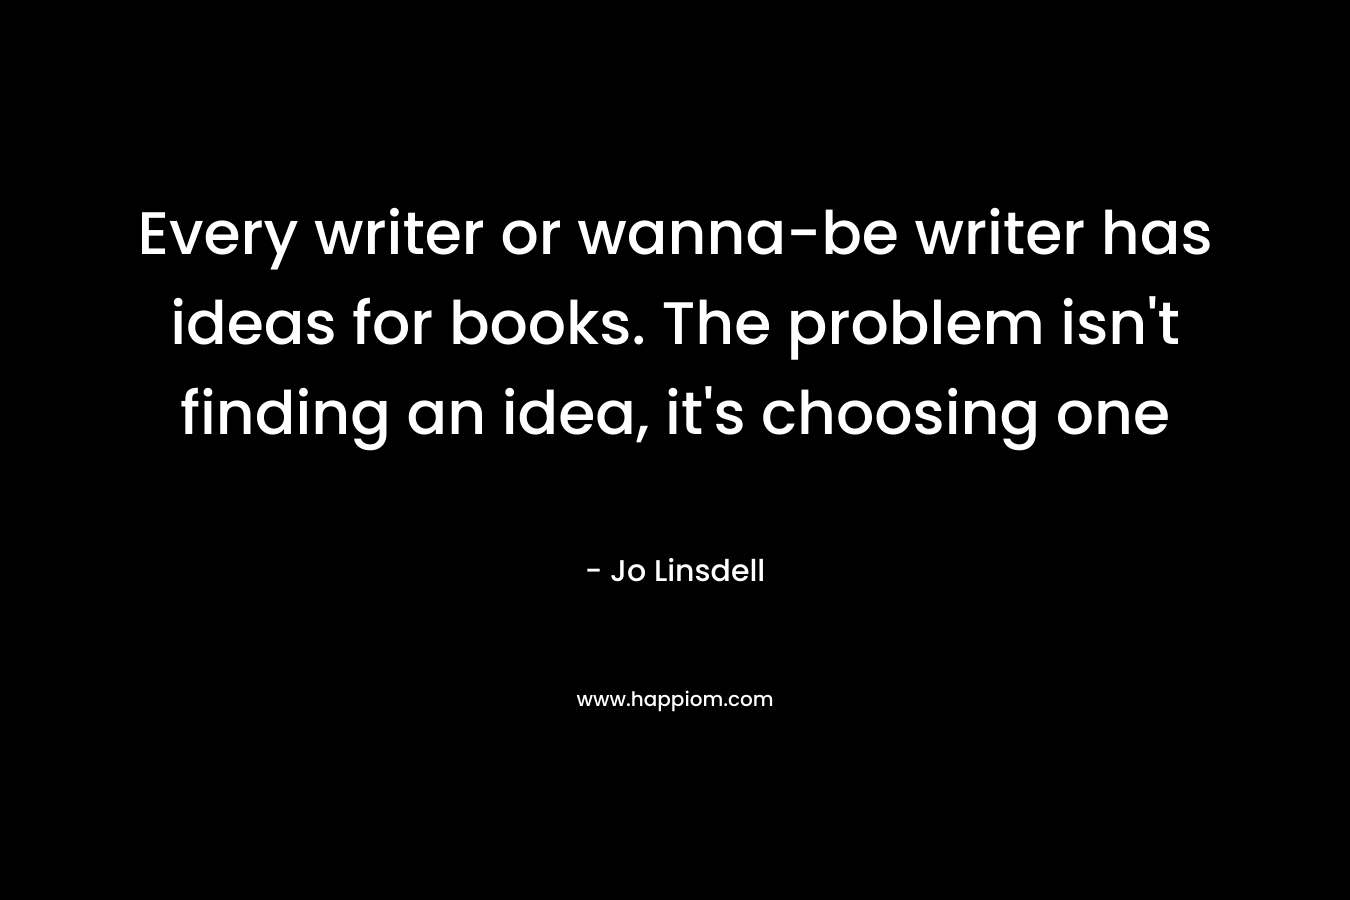 Every writer or wanna-be writer has ideas for books. The problem isn't finding an idea, it's choosing one